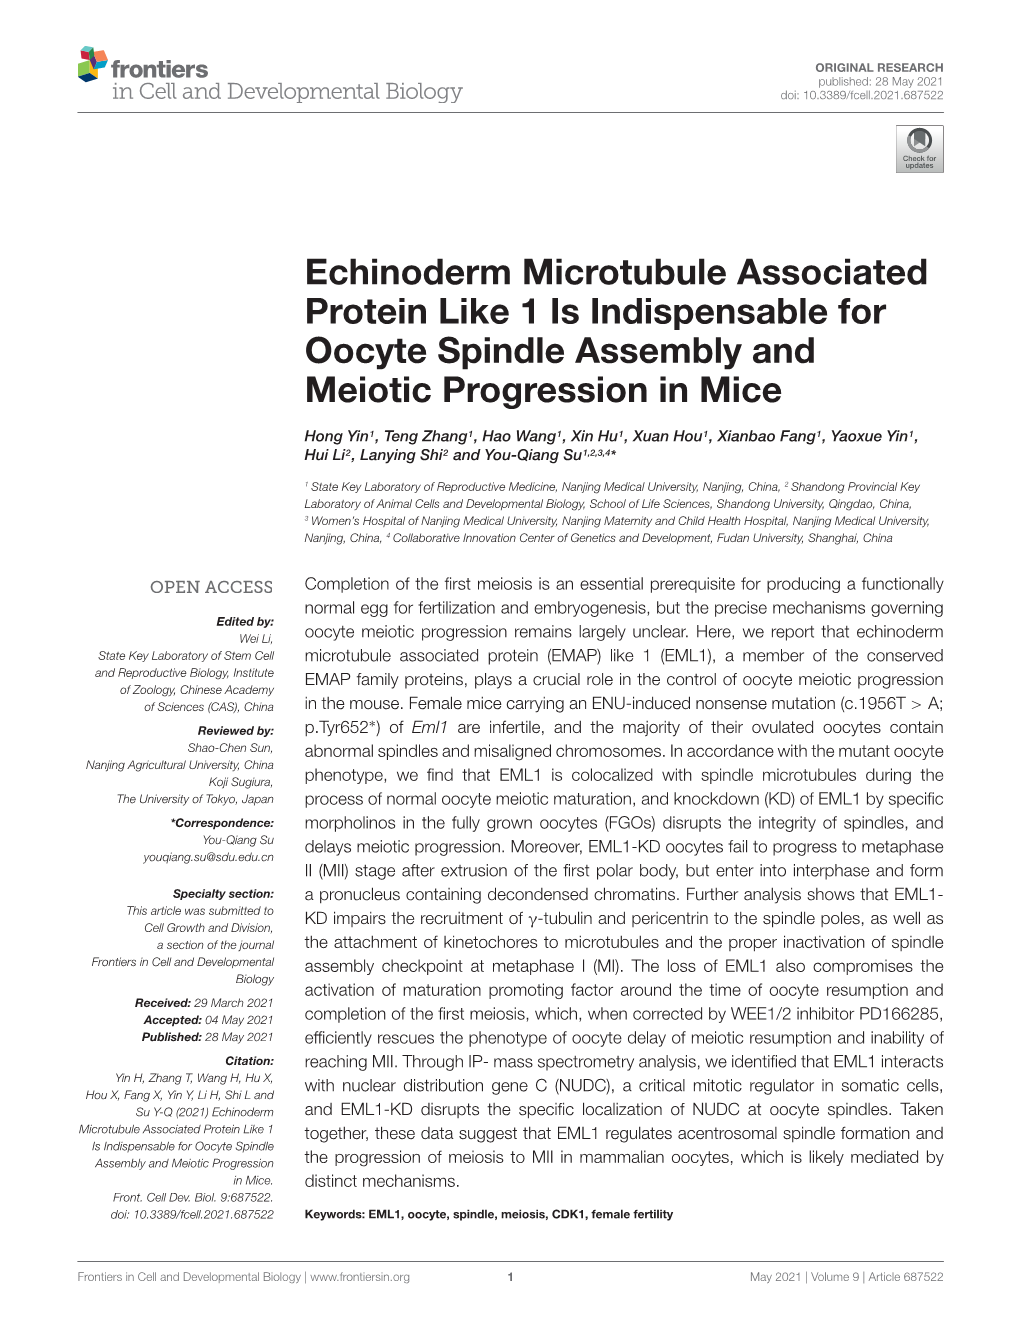 Echinoderm Microtubule Associated Protein Like 1 Is Indispensable for Oocyte Spindle Assembly and Meiotic Progression in Mice